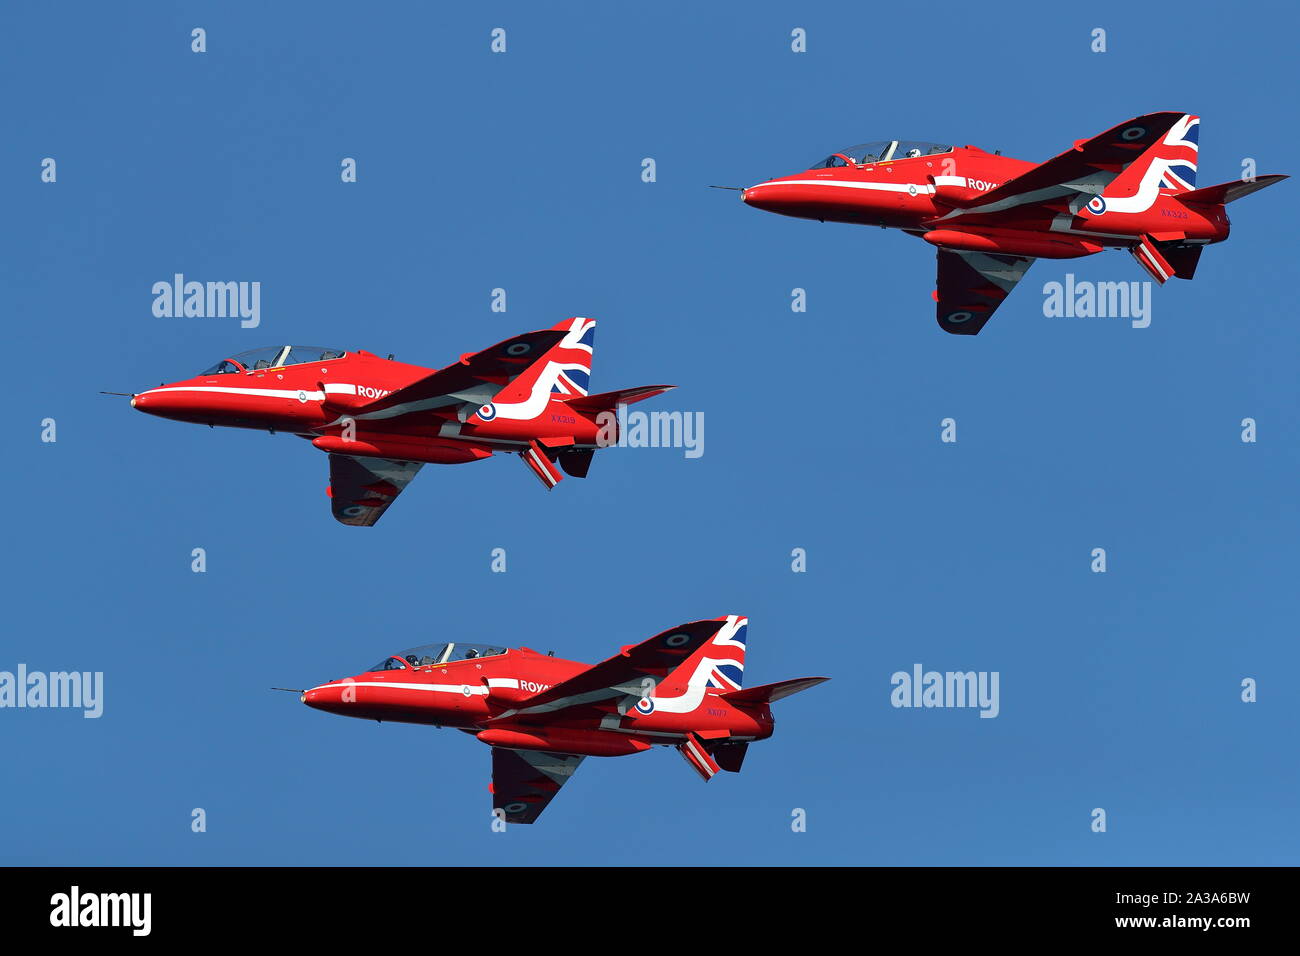 The Royal Air Force Aerobatic Team, The Red Arrows at the Great Pacific Airshow in Huntington Beach, California on October 4, 2019 Stock Photo